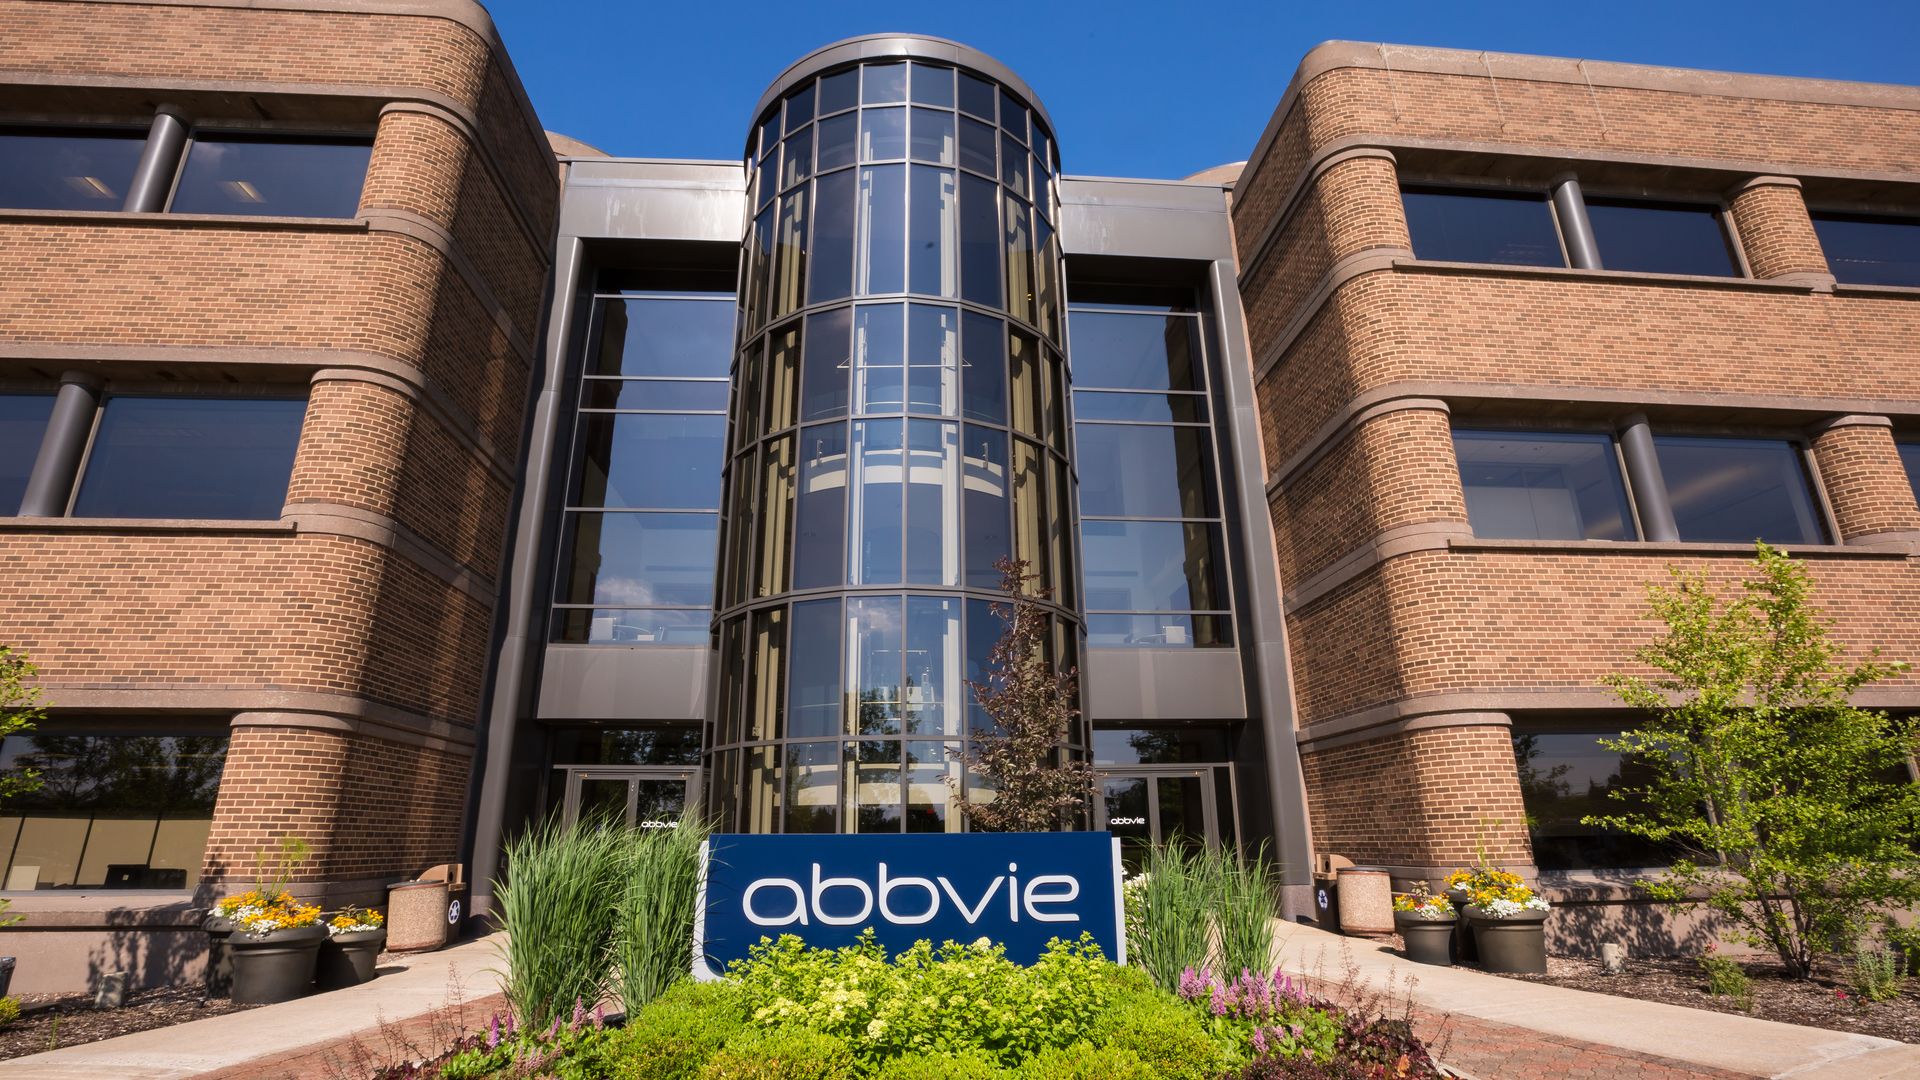 AbbVie headquarters building with an AbbVie sign in front.